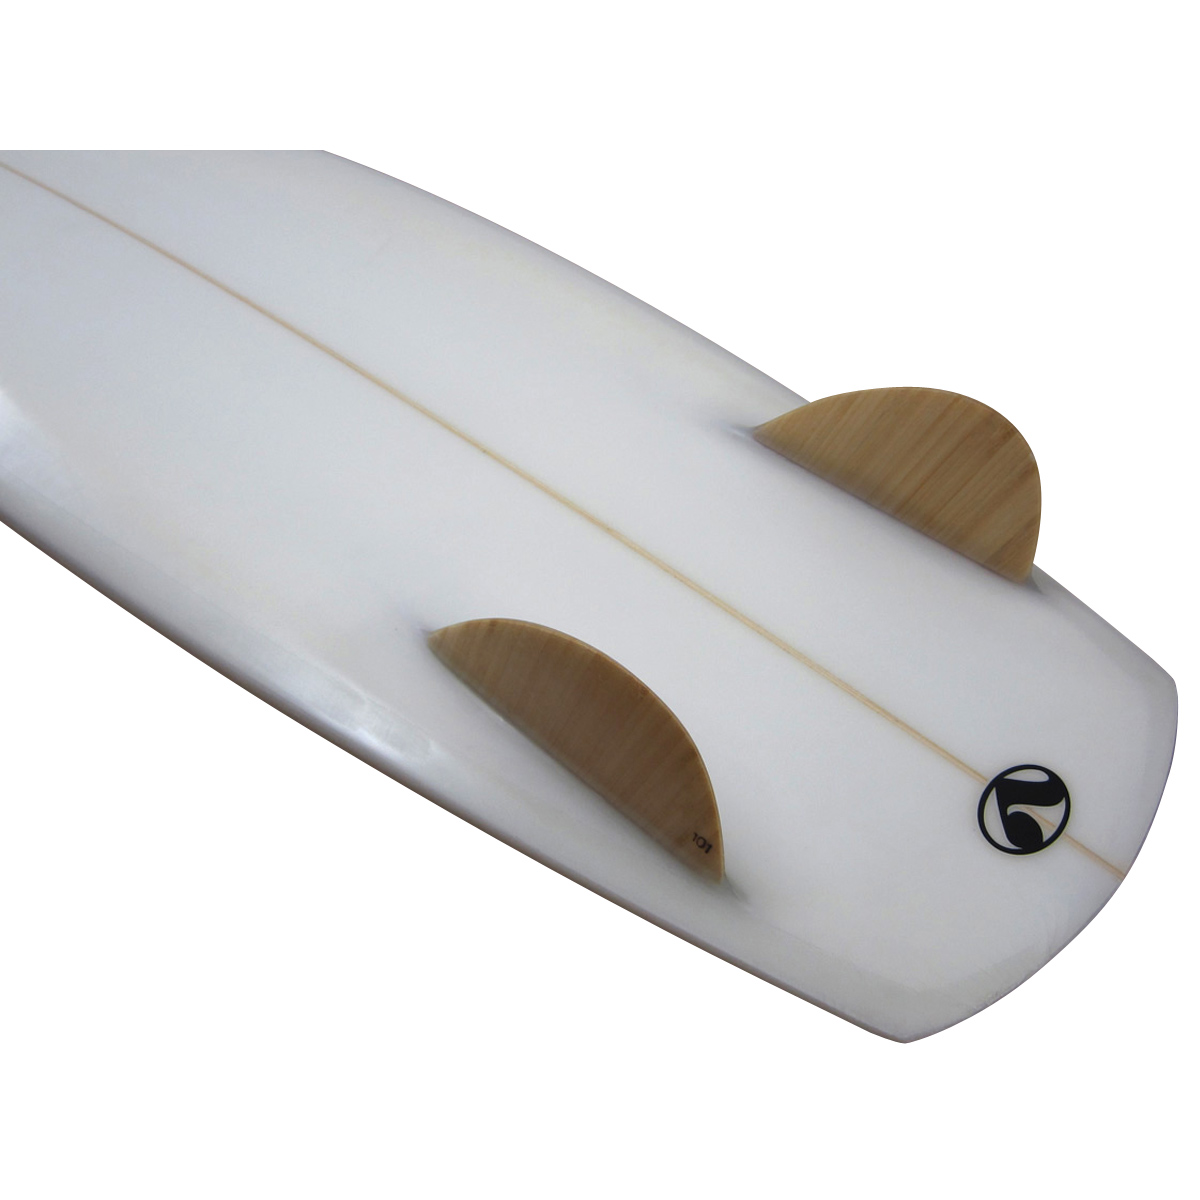 Anderson Surfboards / Mini Simmons 6`1 Hull 